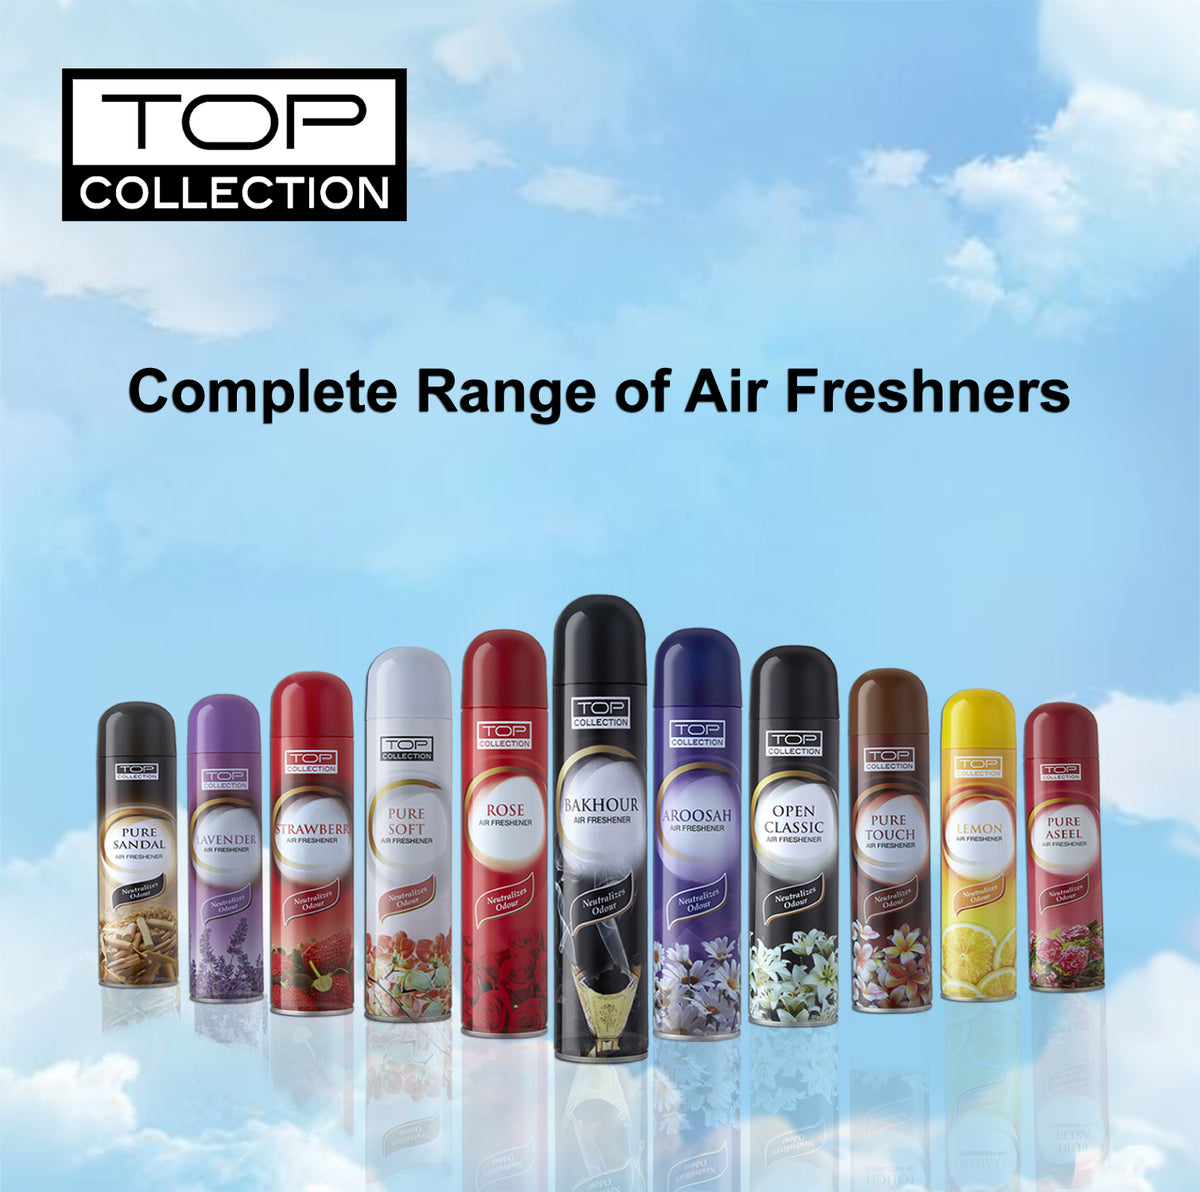 Top Collection Air Freshener - Pure Soft, 300ml